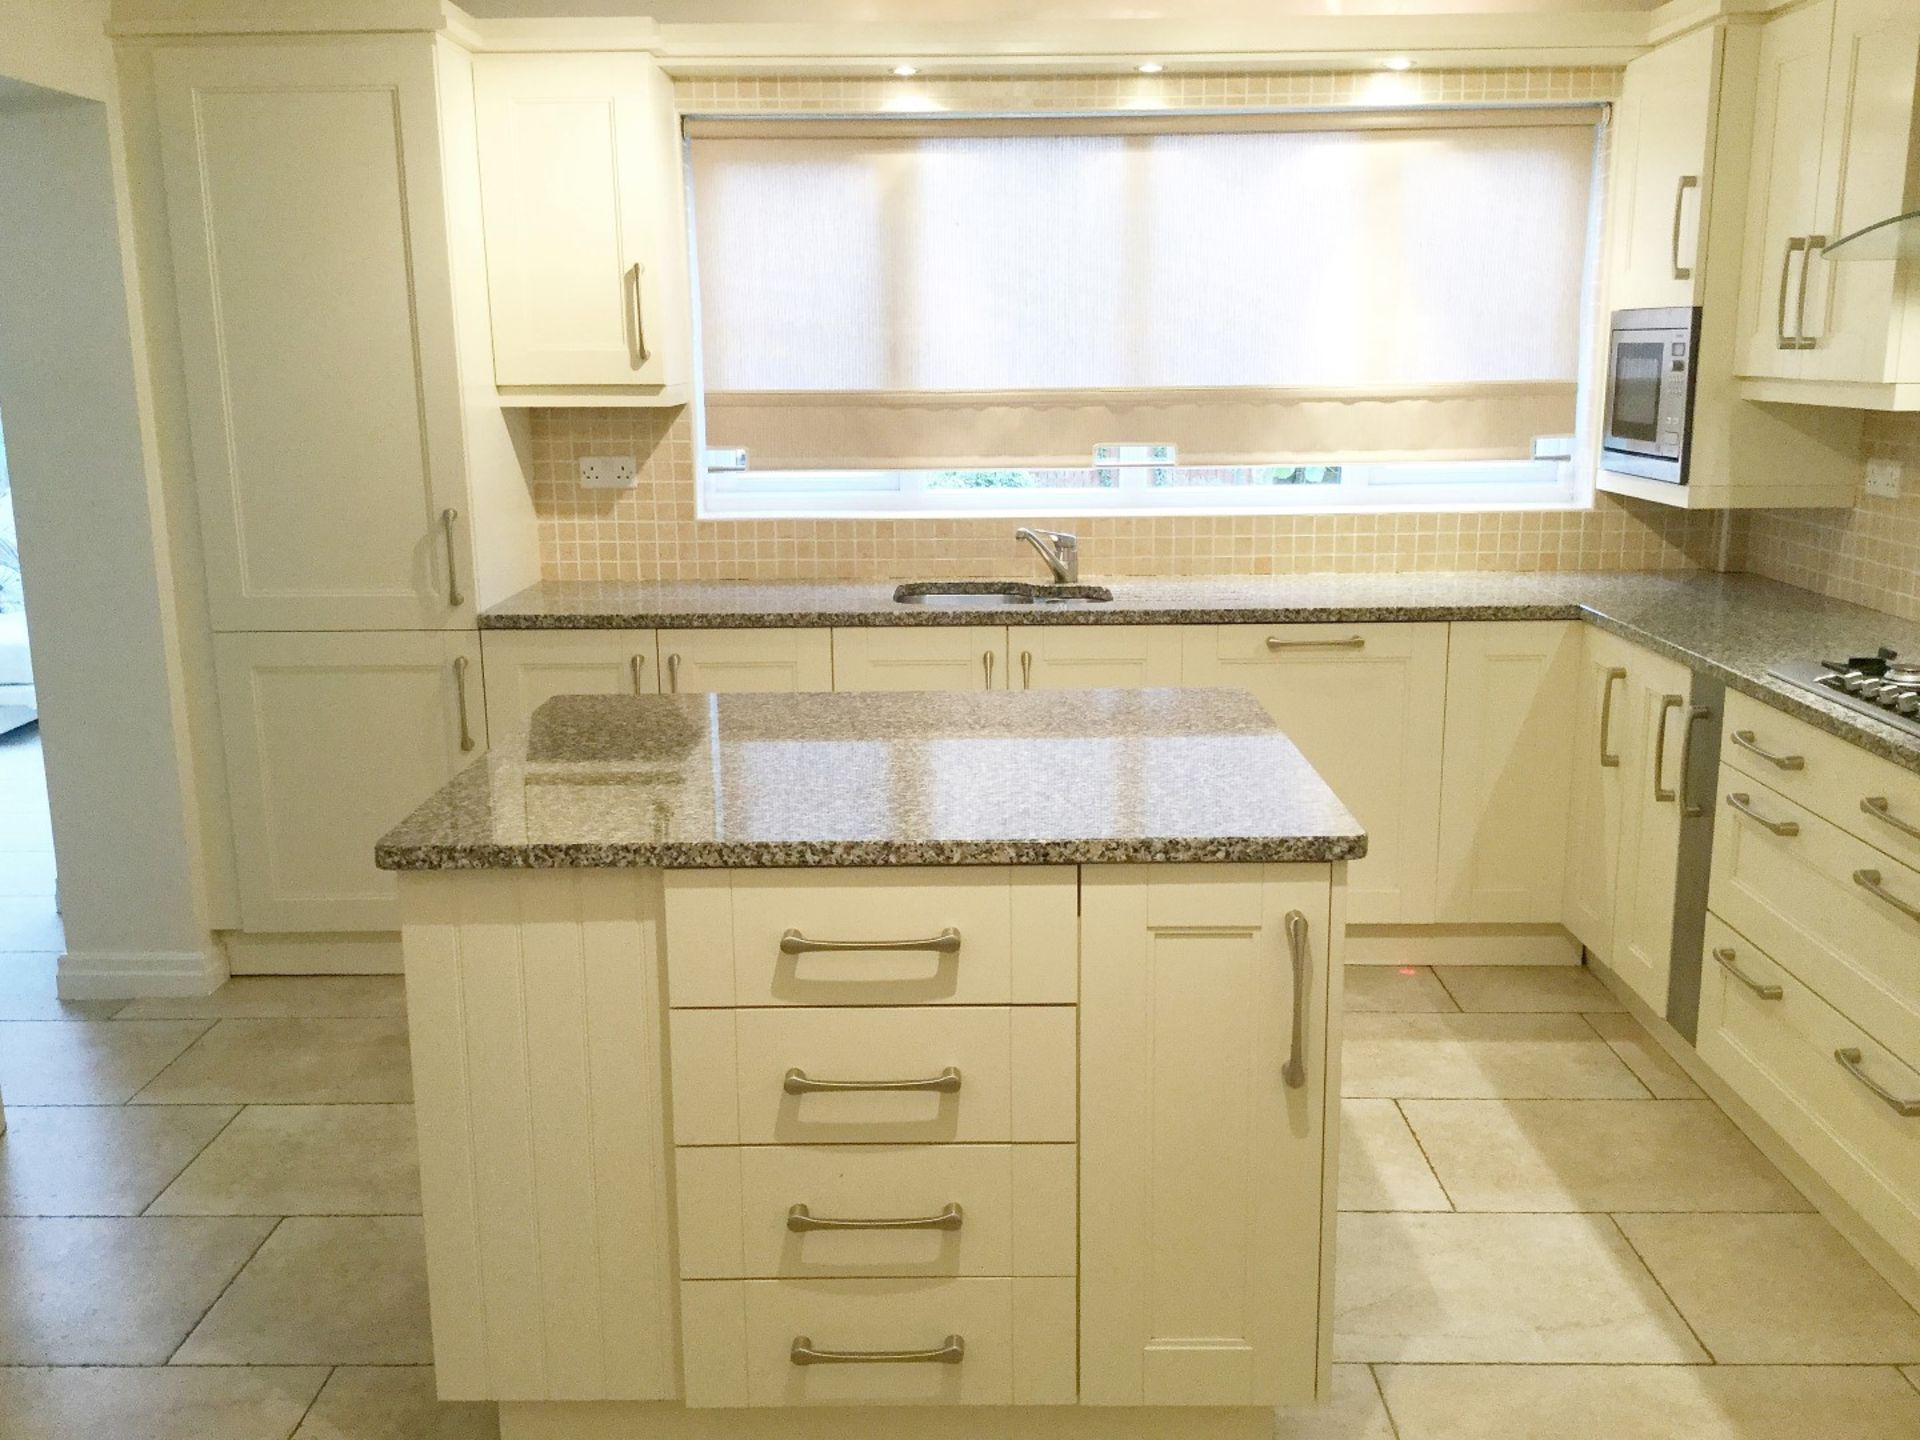 1 x Beautifully Crafted Bespoke Fitted Kitchen With Granite Worktops, Central Island, Utility - Image 5 of 18